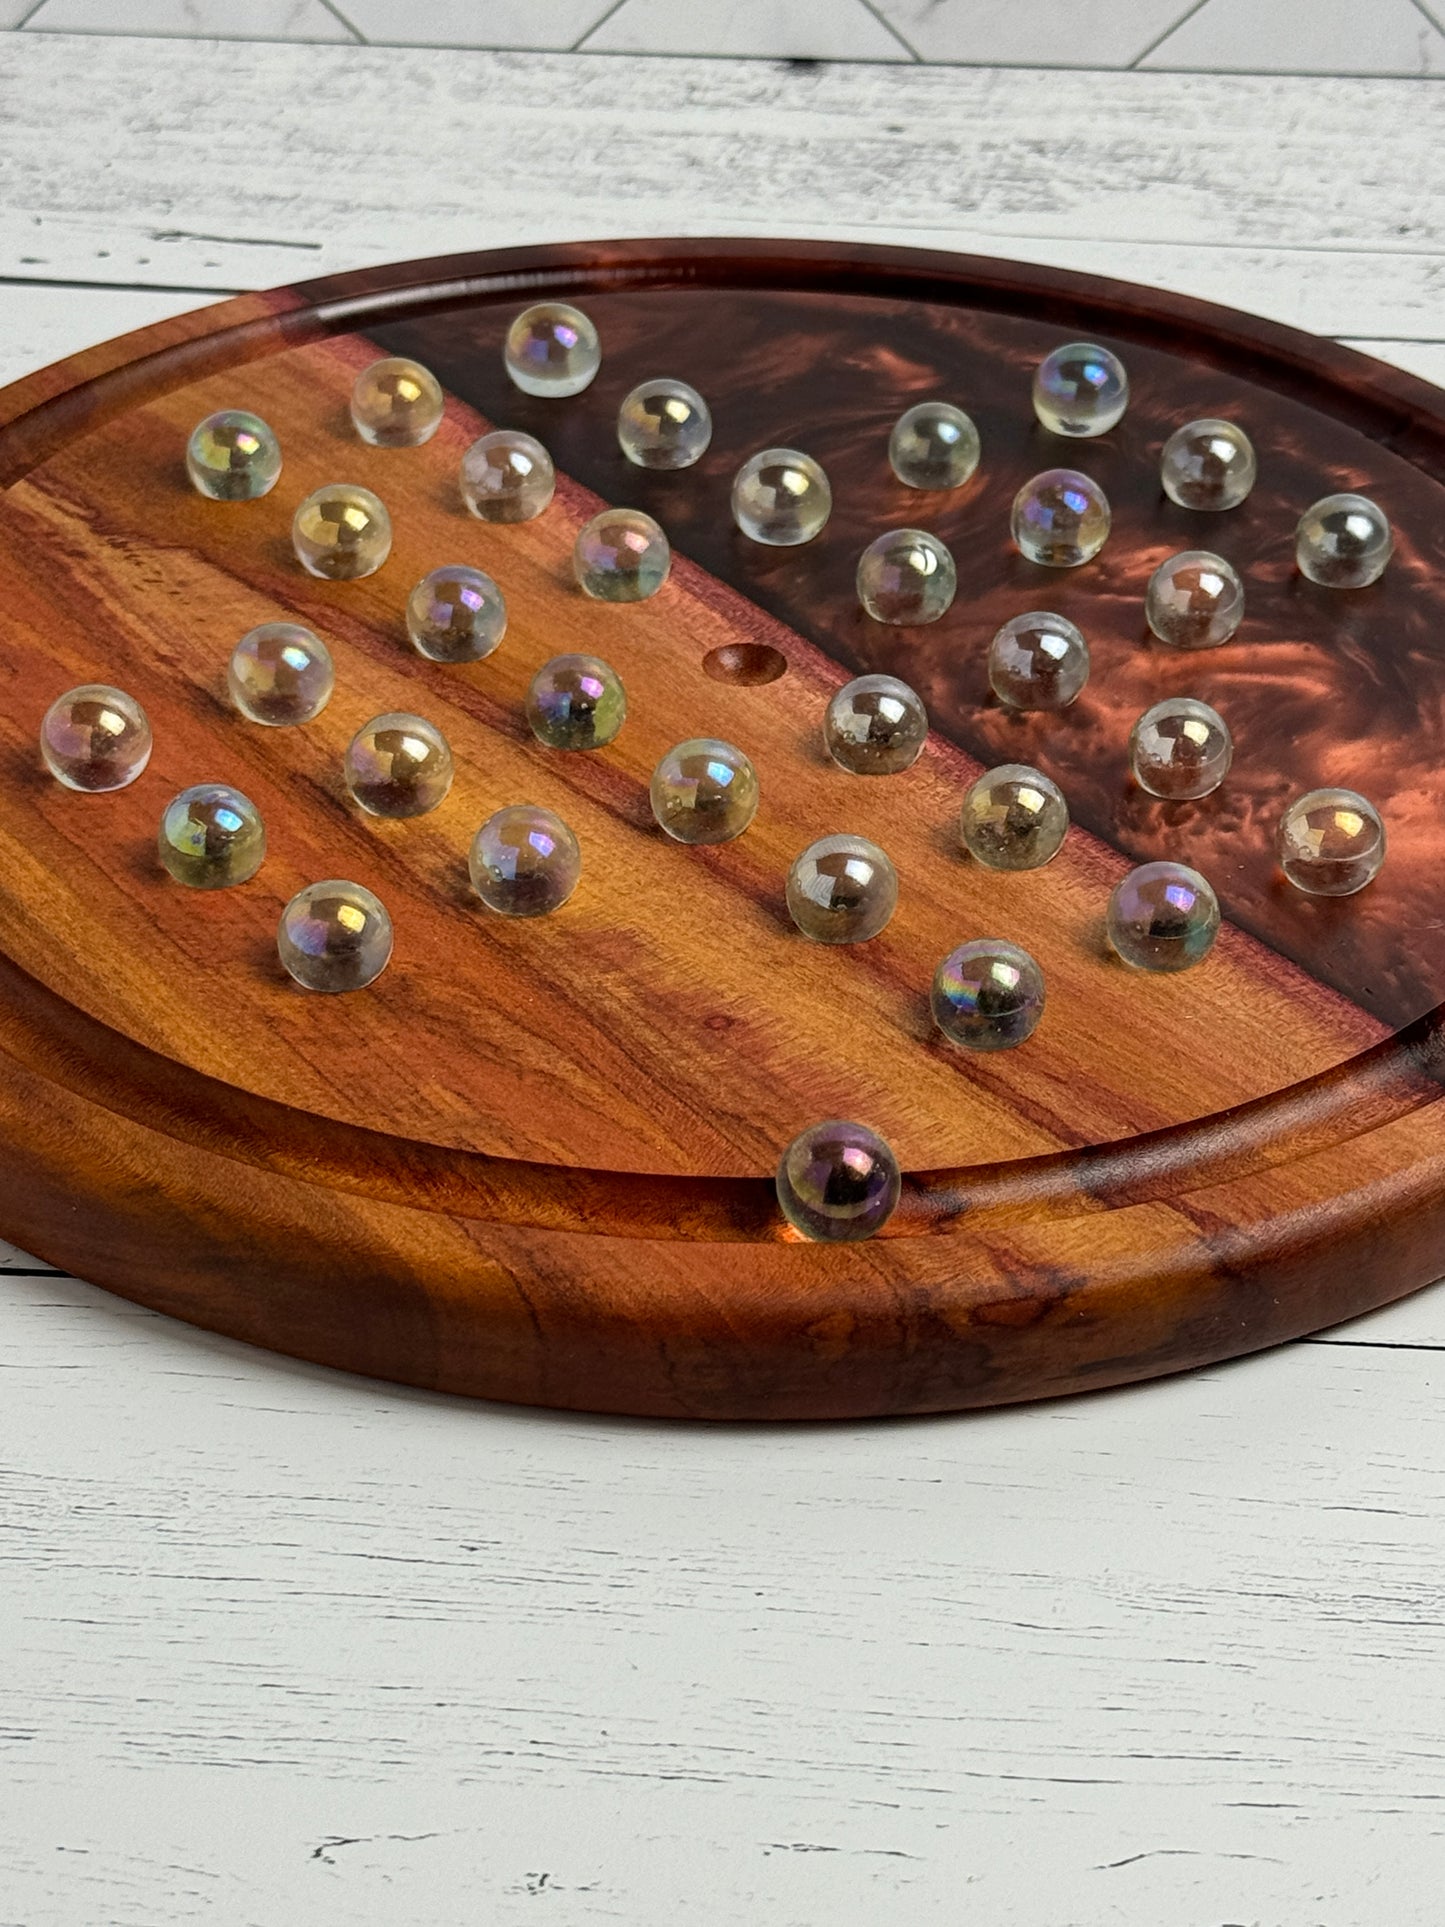 Deluxe Solitaire Board - Red Hart